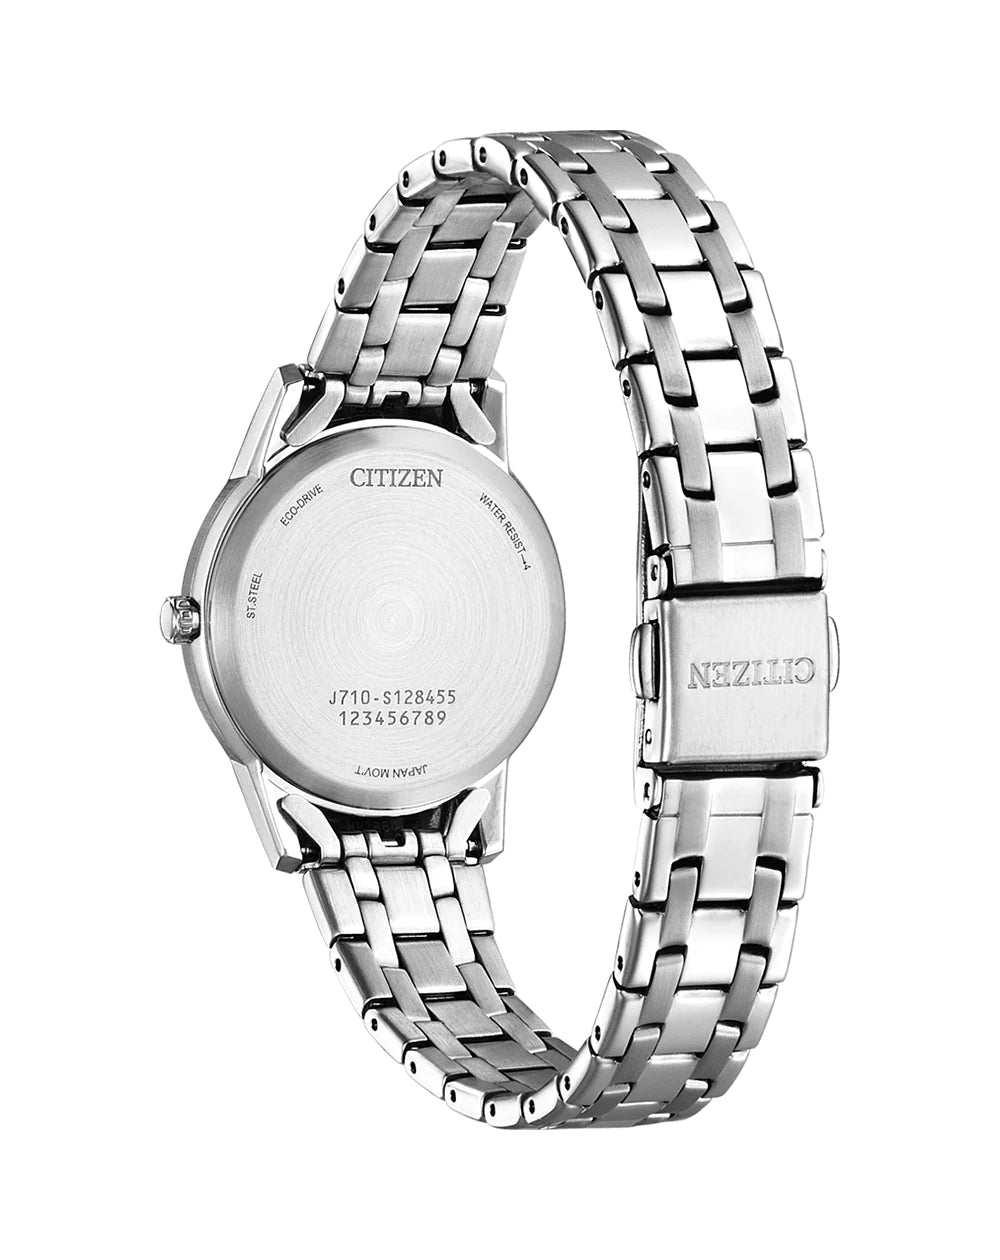 Citizen Ladies Eco Drive Blue and Silver Watch with Diamonds